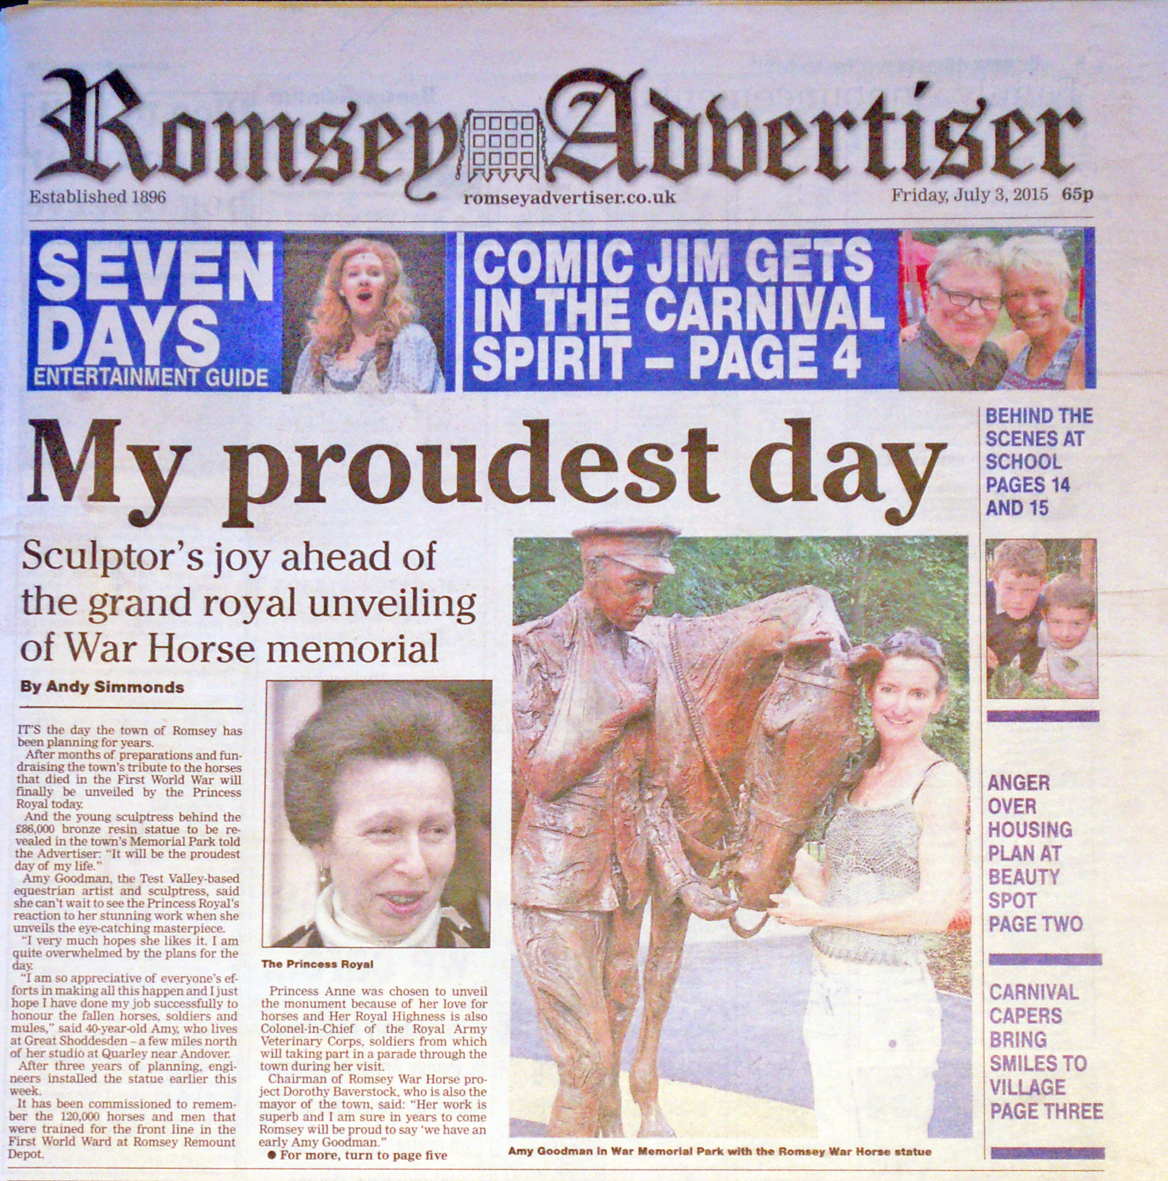 Cover of the Romsey Advertiser, July 3rd 2015